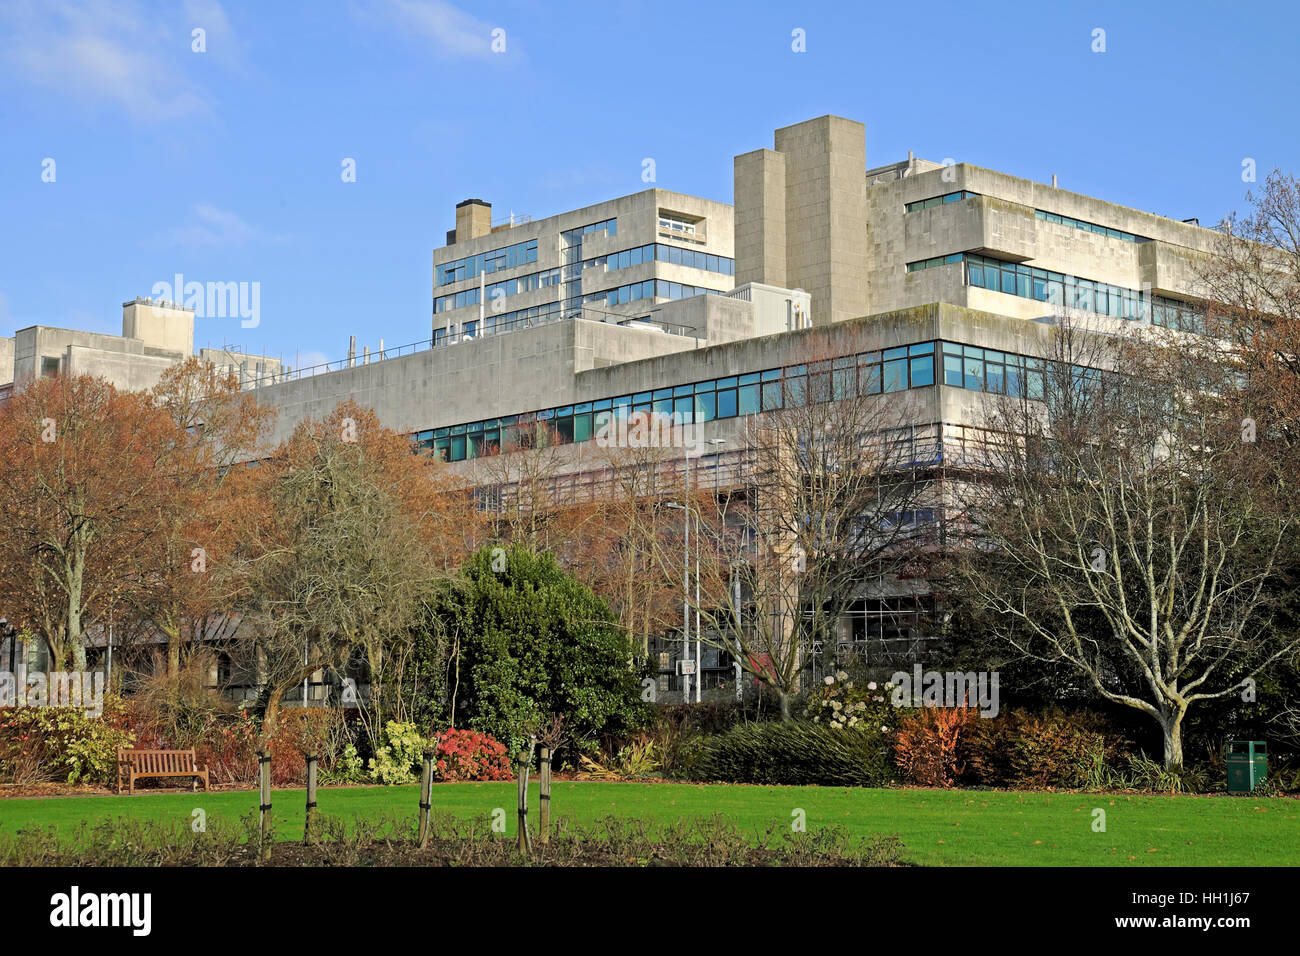 Exterior outside view of Cardiff University Sir Martin Evans Biosciences building in Wales UK Great Britain KATHY DEWITT Stock Photo